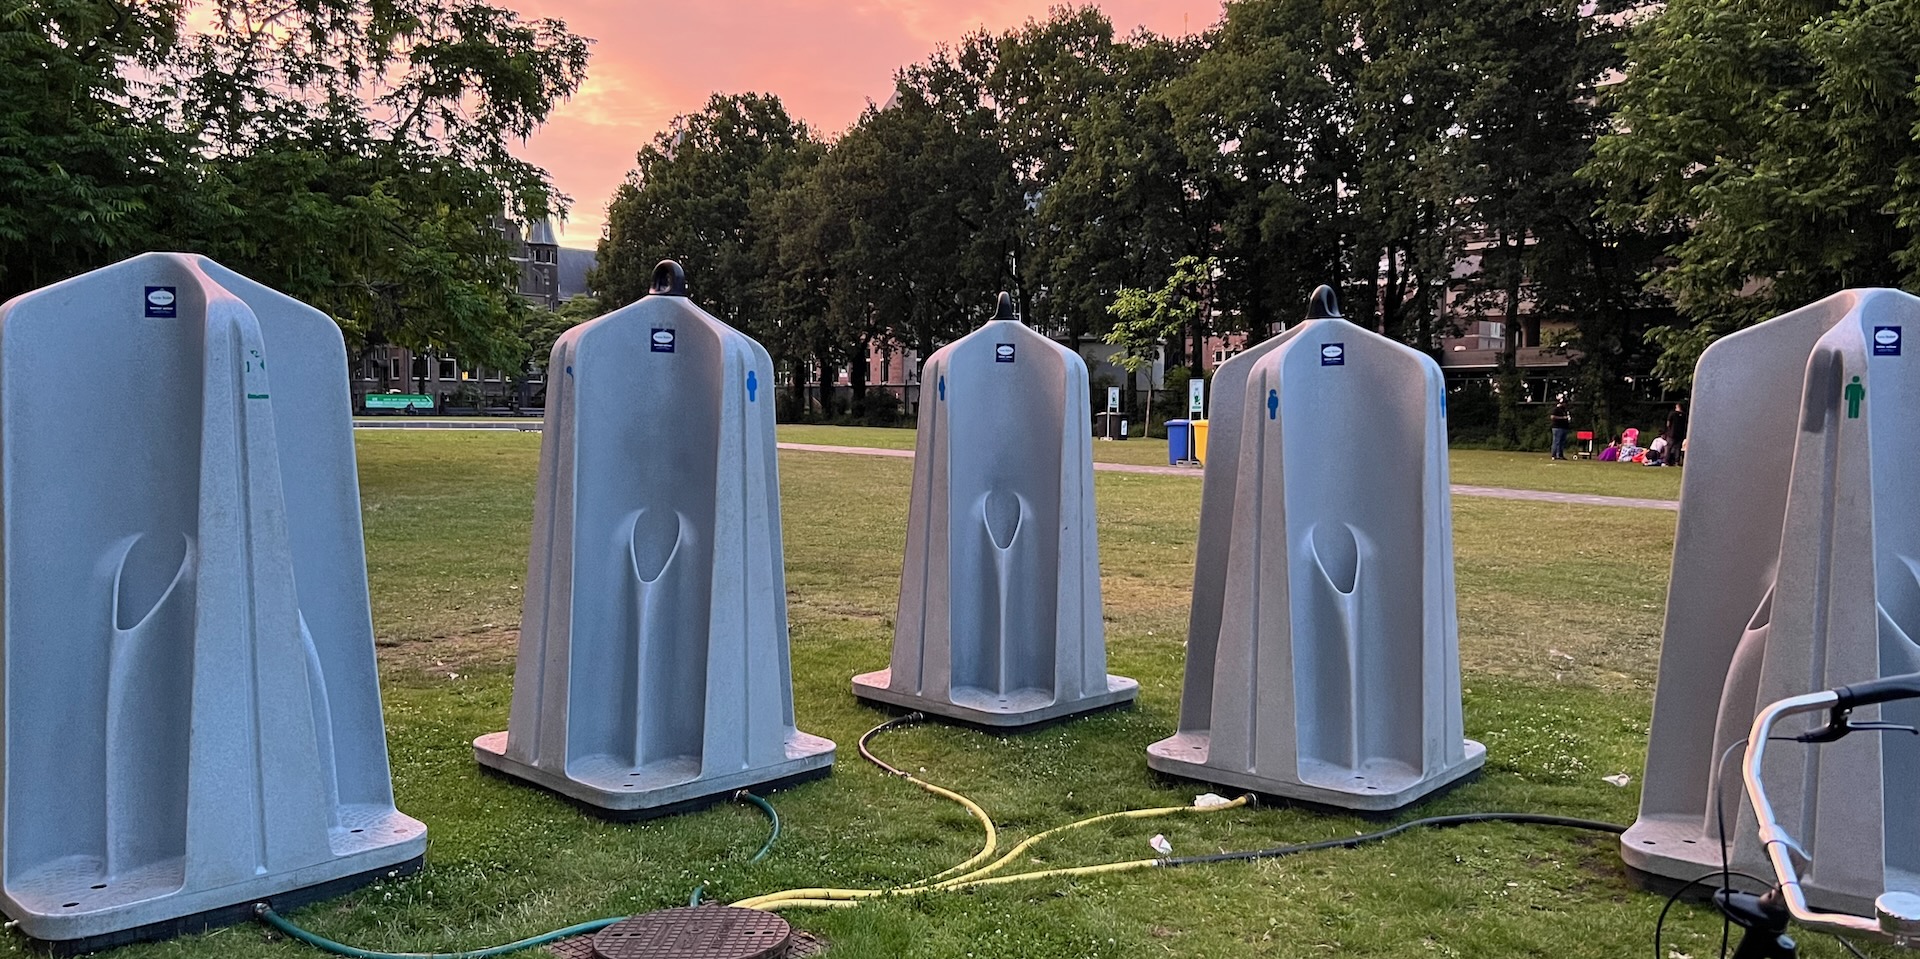 Oosterpark port-a-potties.